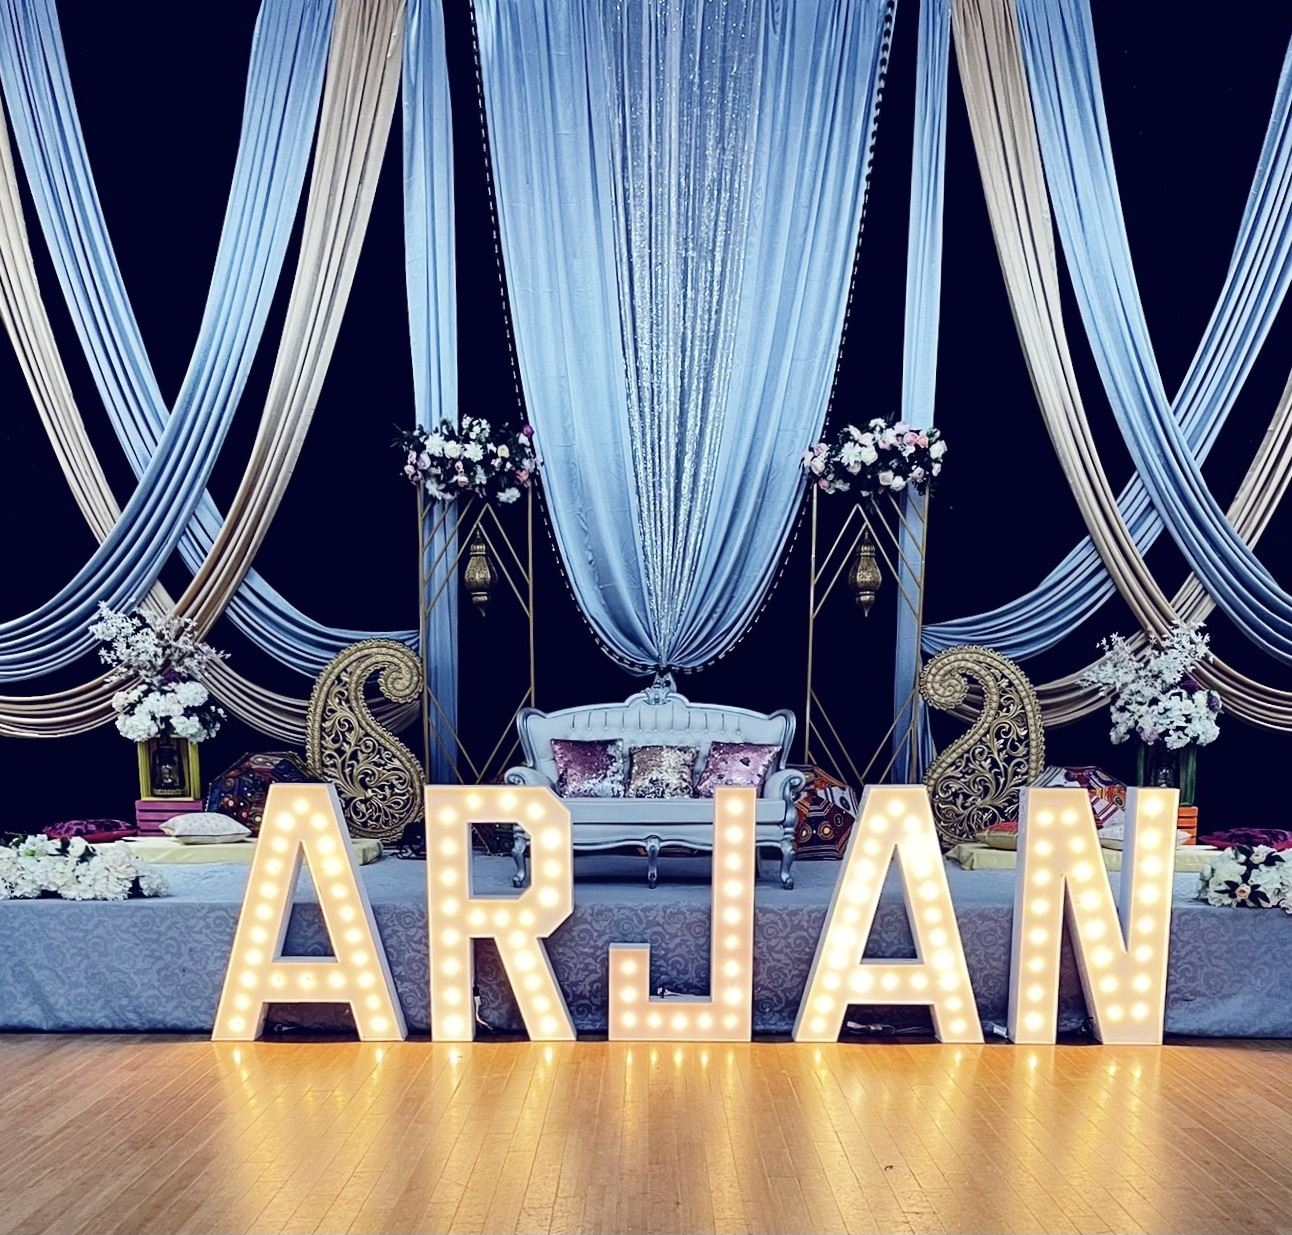 newmarket marquee letter rentals